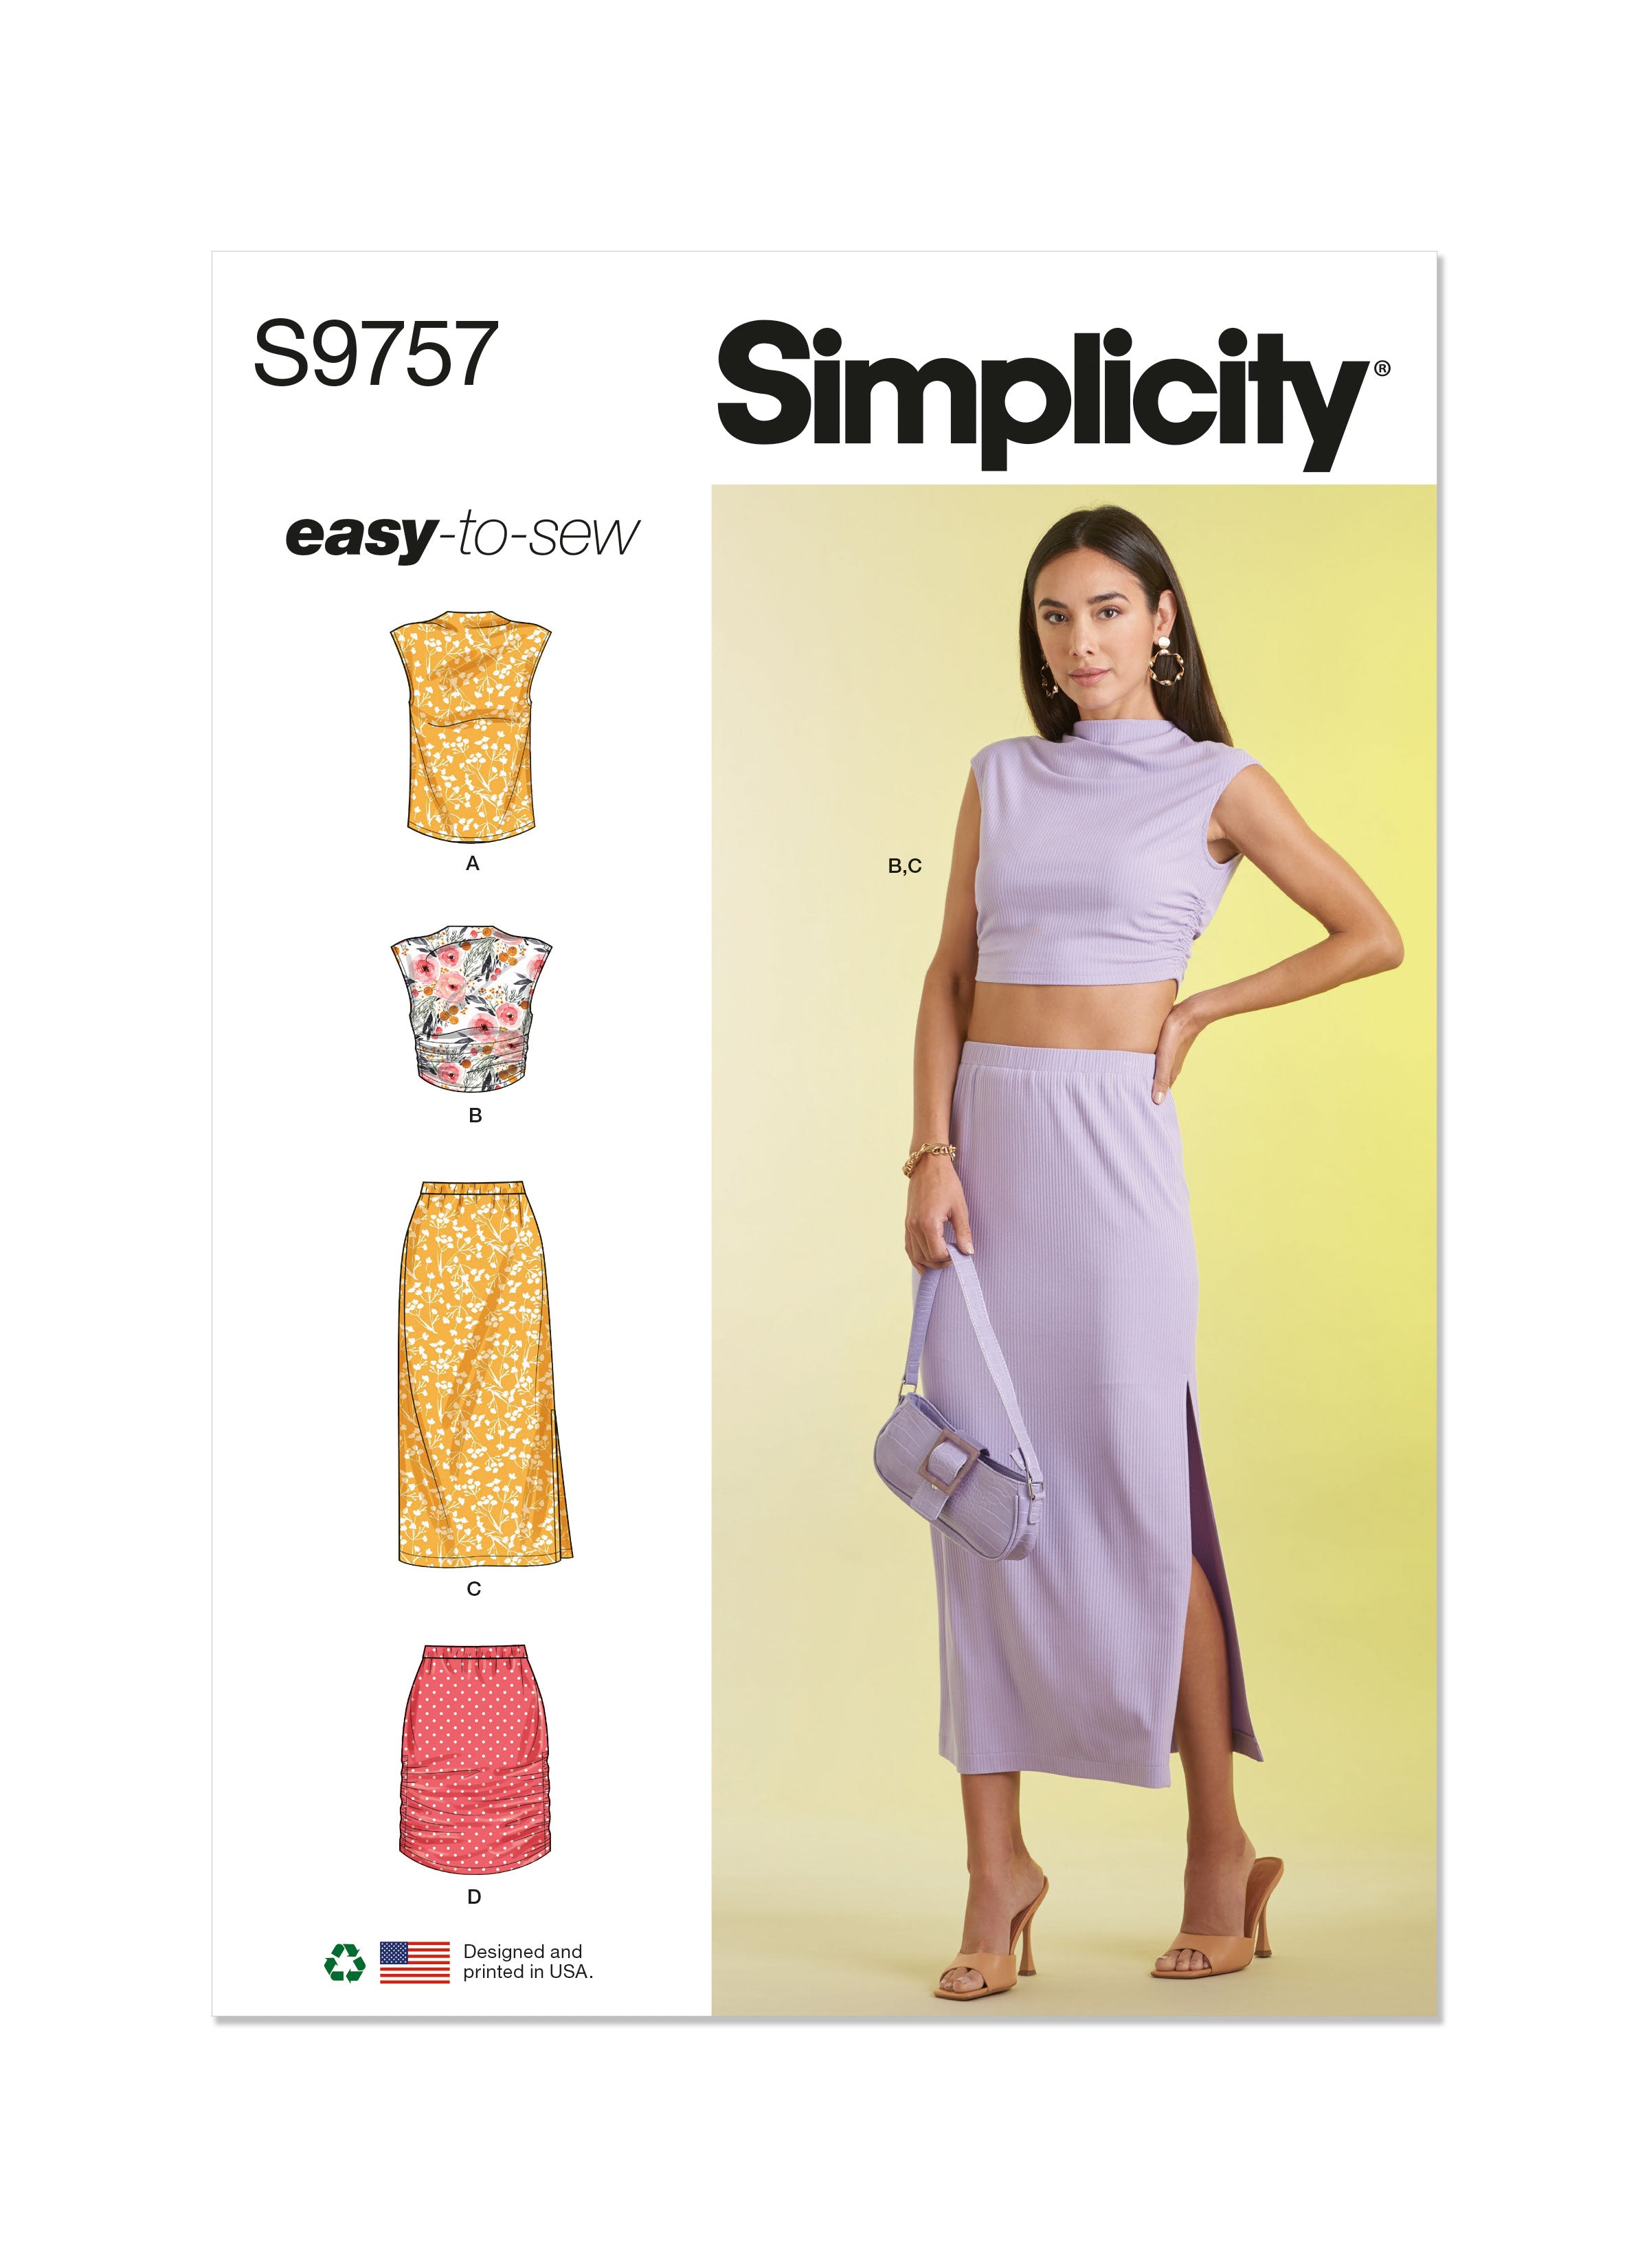 Simplicity 9757 sewing pattern Misses' Knit Top and Skirt in Two Lengths from Jaycotts Sewing Supplies